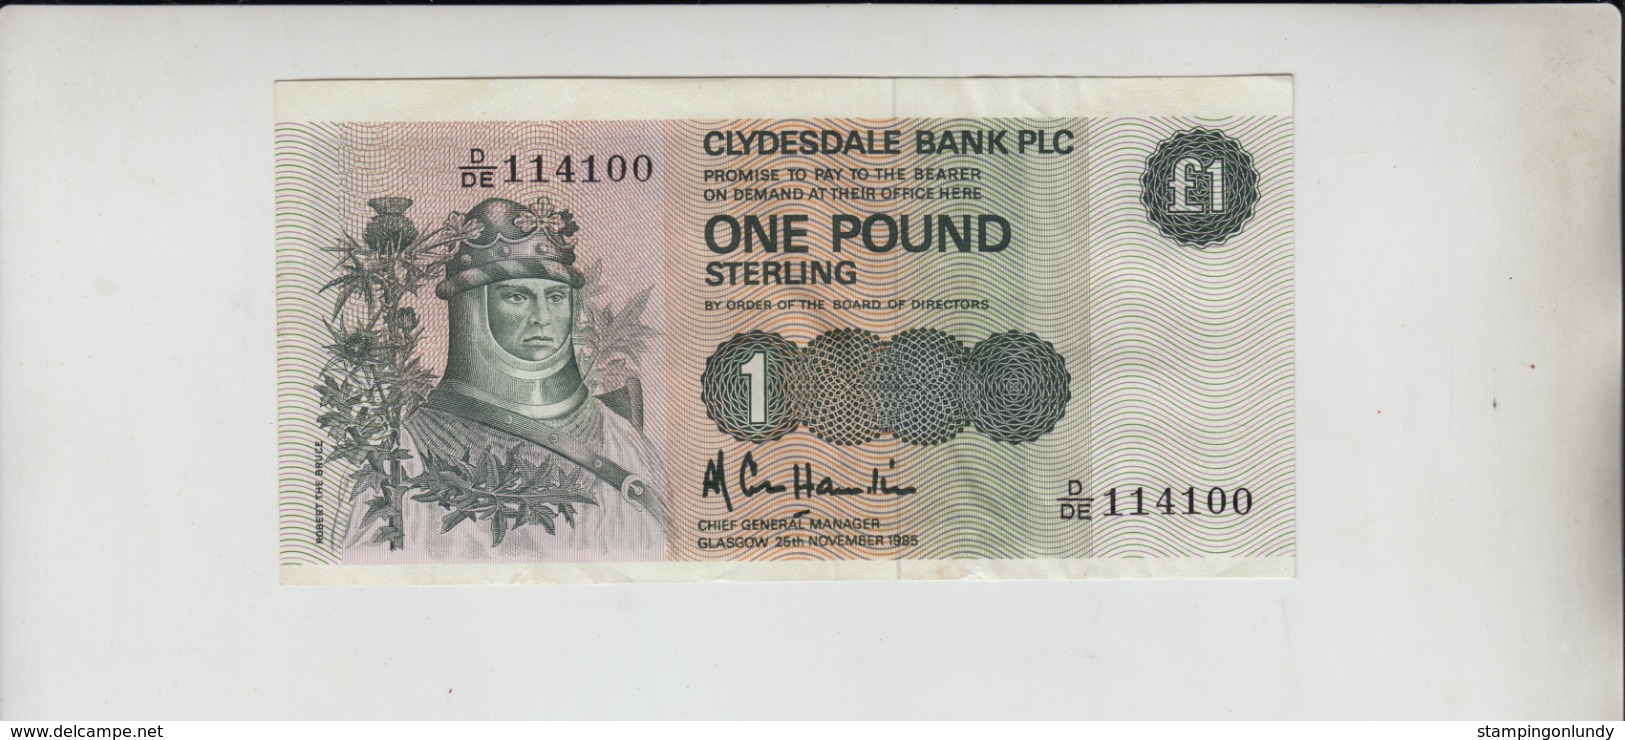 AB574 Clydesdale Bank PLC £1 Note 25th November 1985 #D/DE 114100 FREE UK P+P BUY 1 GET 1 (CHEAPEST) 1/2 PRICE BANKNOTES - 1 Pound